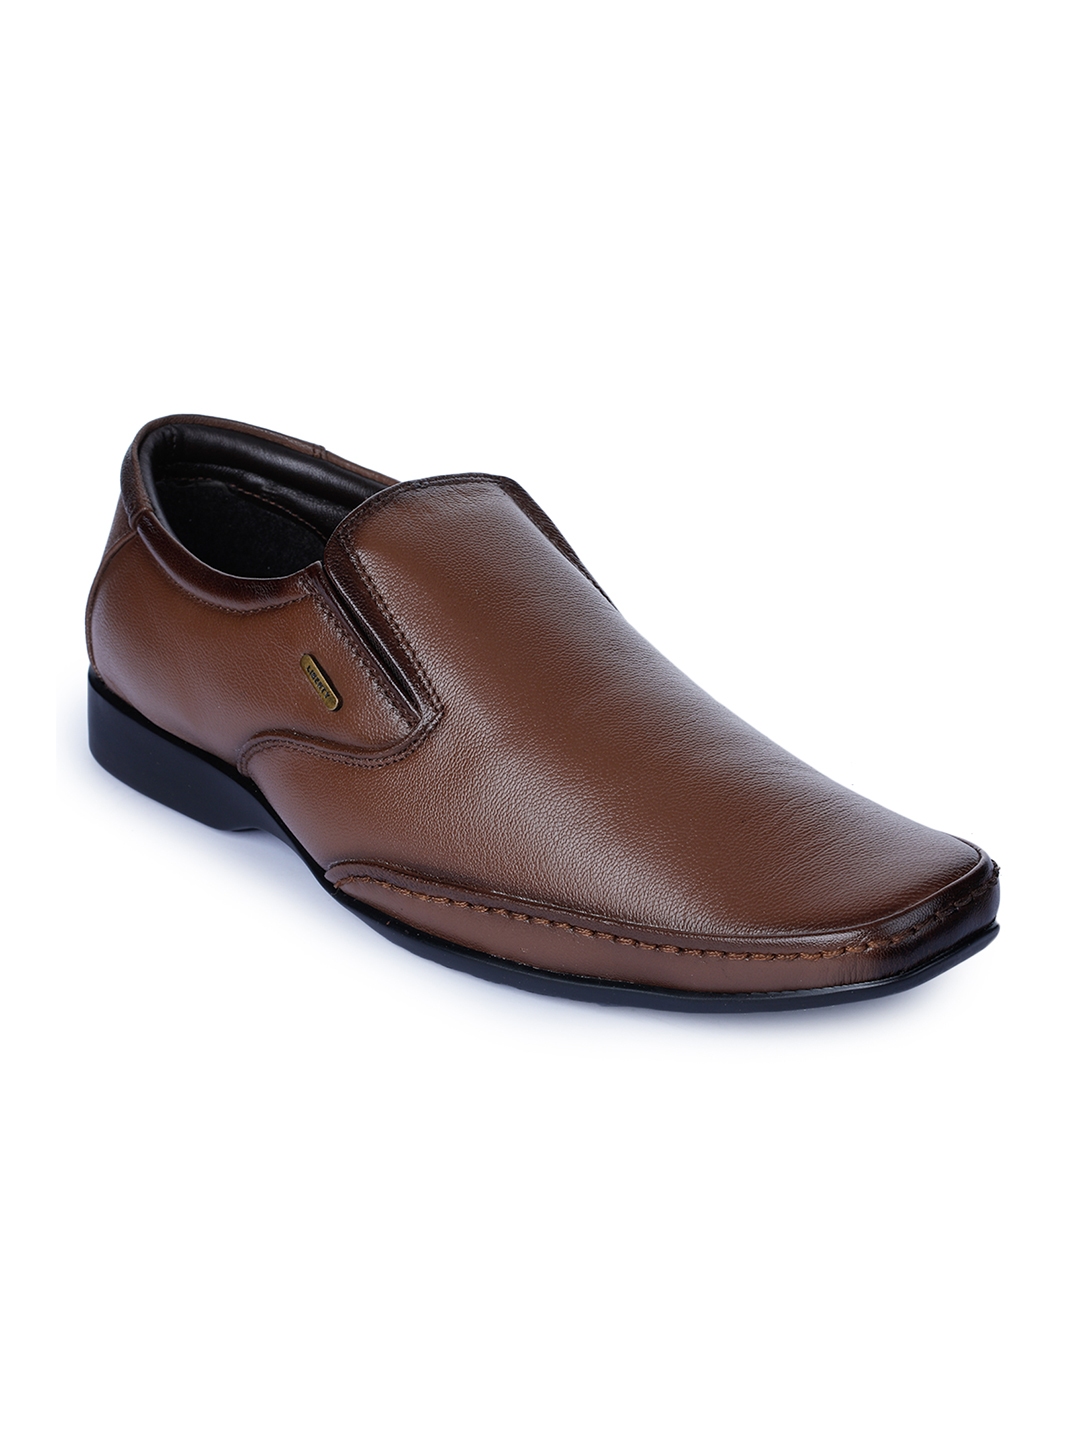 Buy Liberty Men Brown Solid Leather Formal Slip On Shoes Formal Shoes For Men 12009850 Myntra 5559